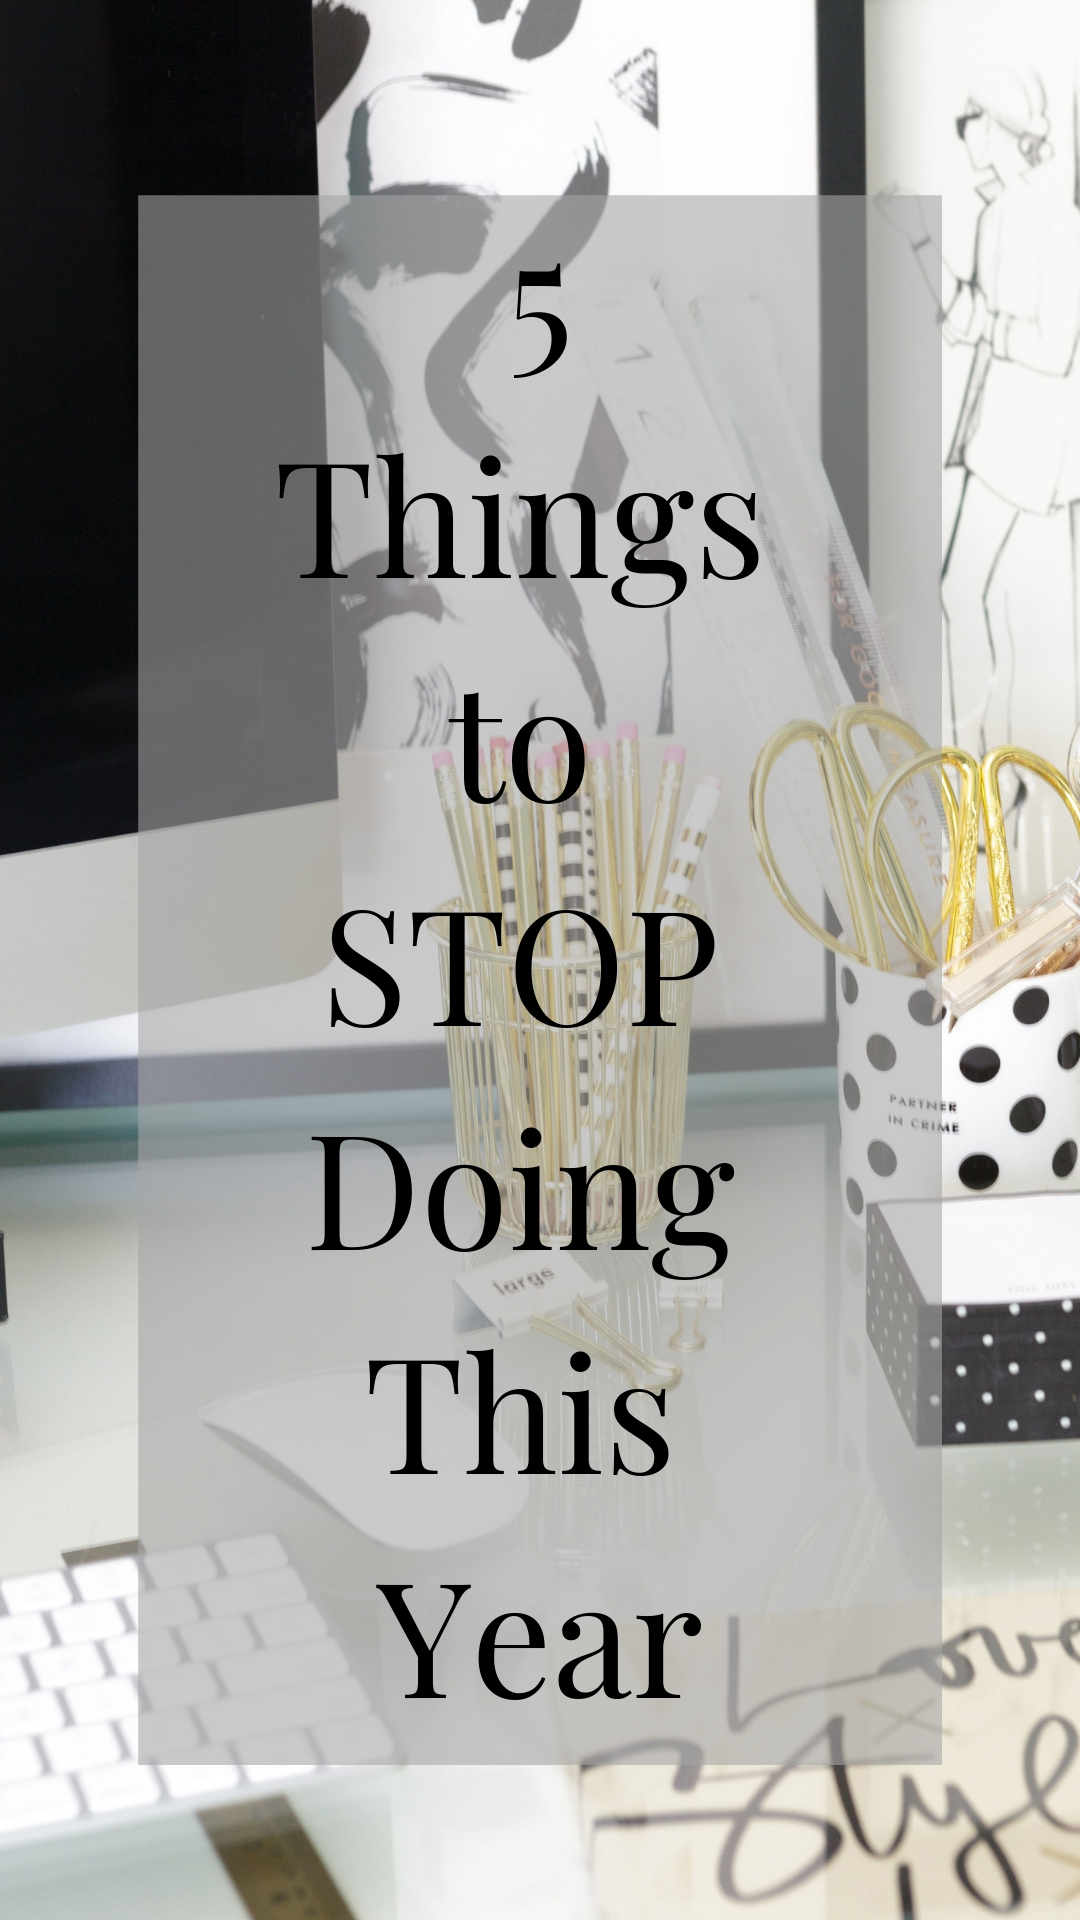 Want to rock this year? Check out this list of 5 Things to Stop Doing This Year! Making these changes is easy! Get started today!